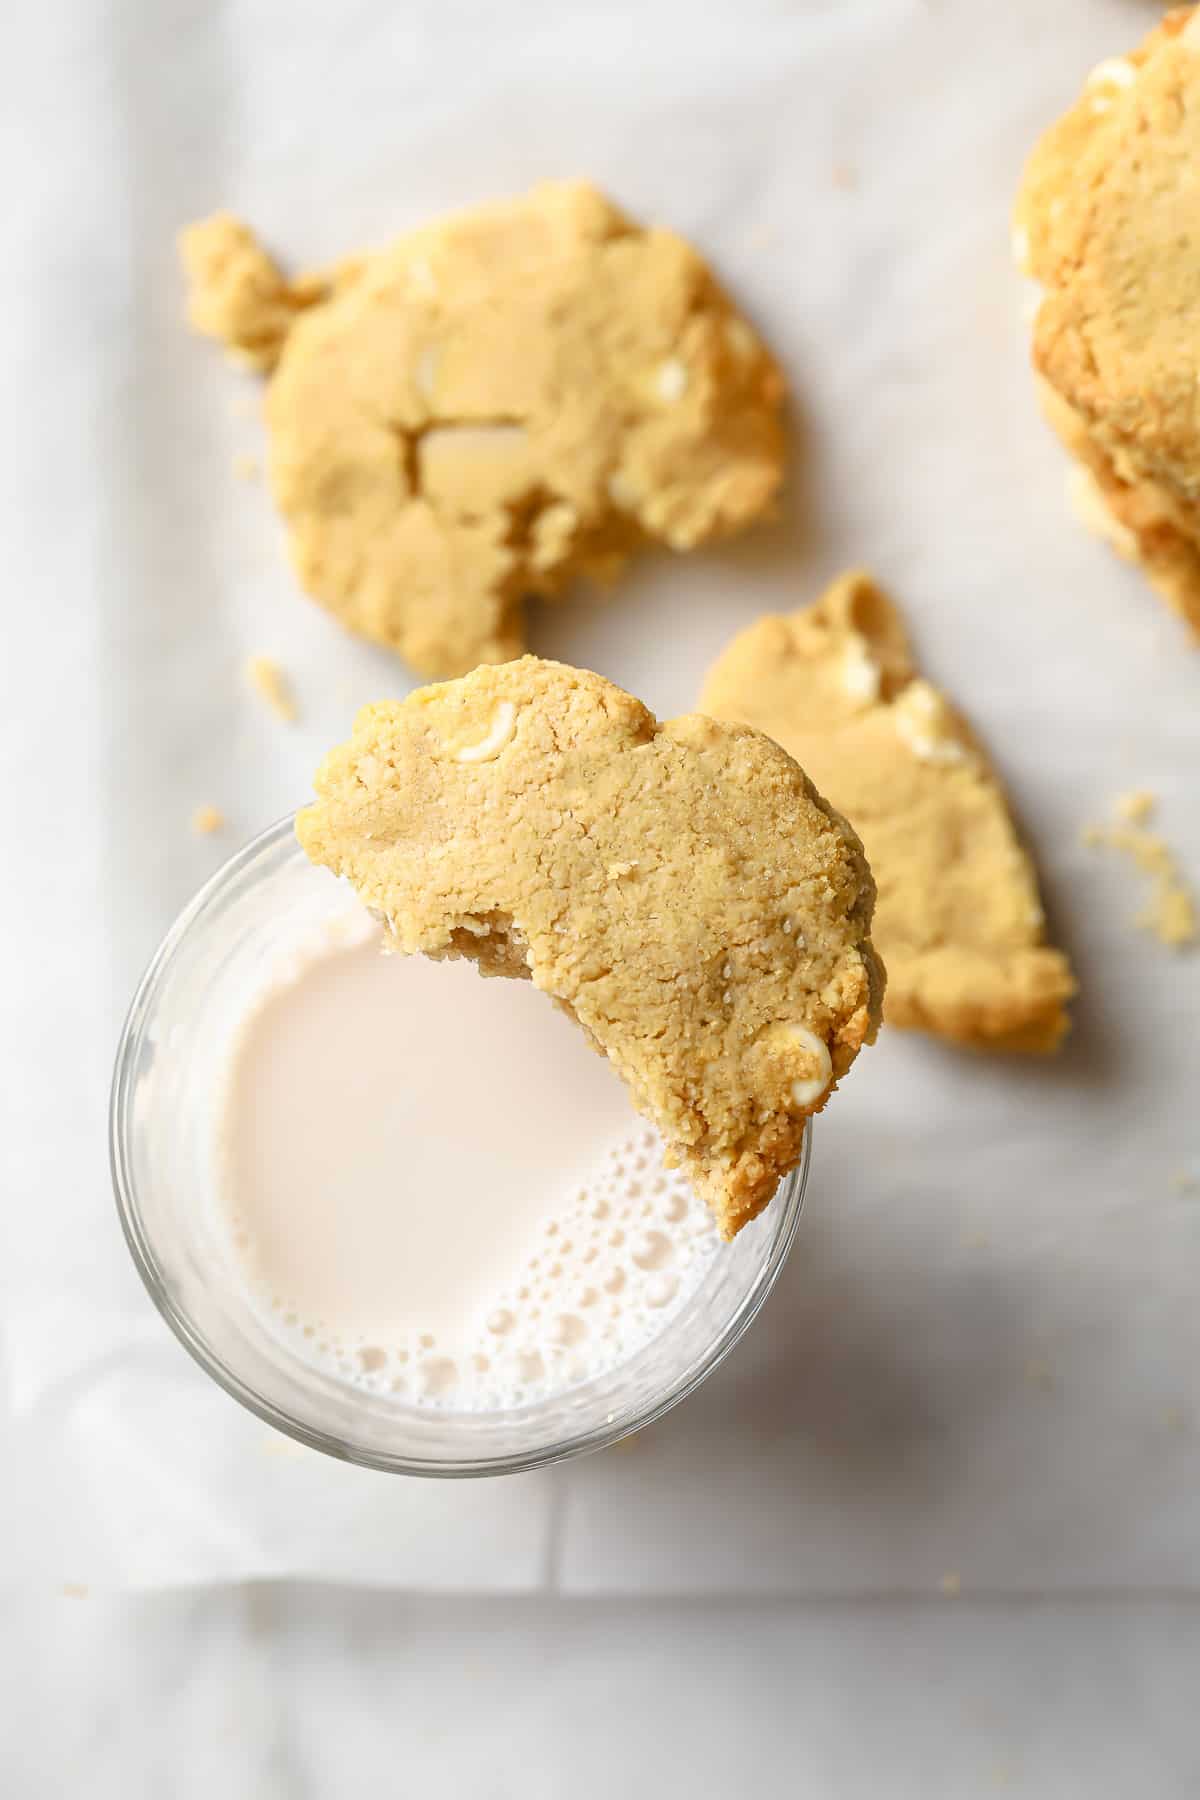 keto white chocolate macadamia nut cookies fresh out of the oven with a cold glass of milk